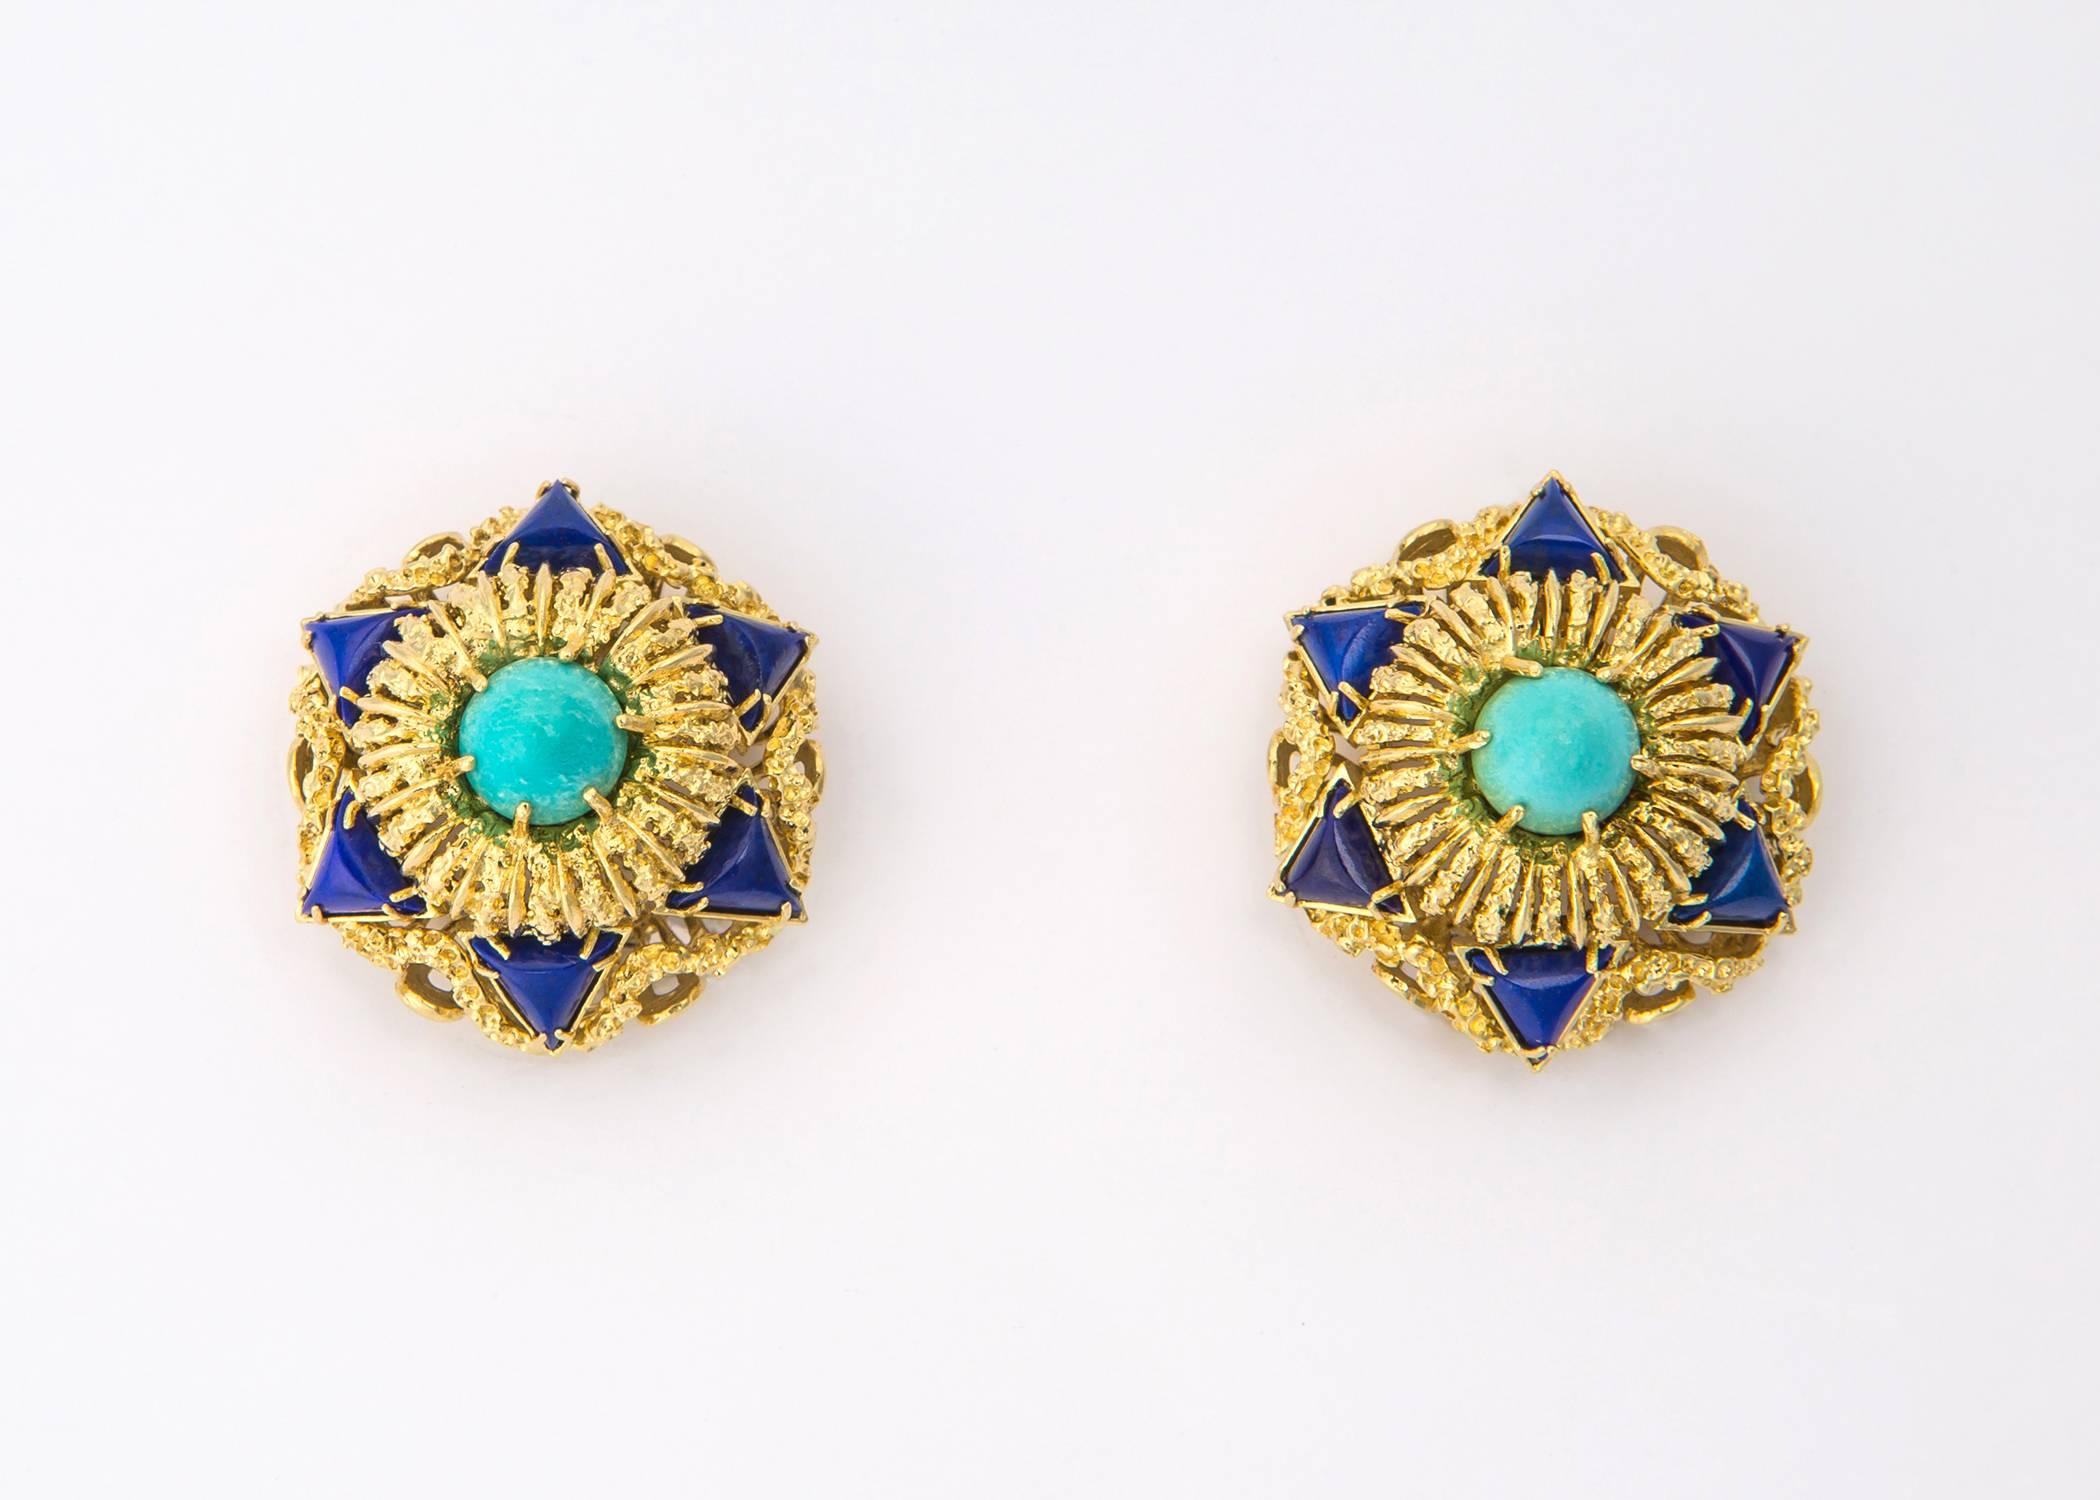 Bold and dimensional. Exceptional texture and detailing turn this earring into wearable art. Turquoise and lapis are the perfect color combination. A truly chic statement piece. 1 inch in size. 